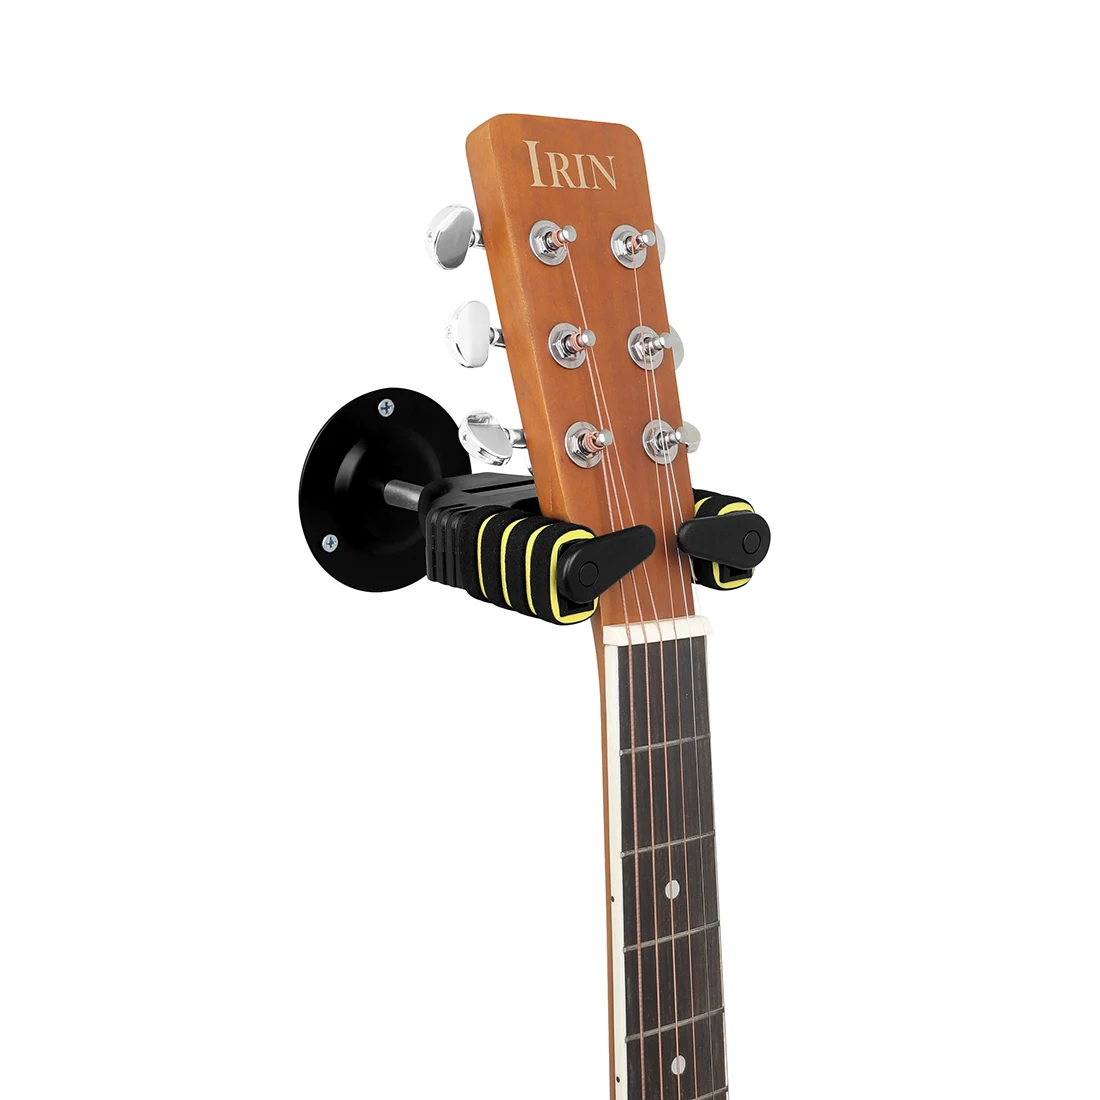 Guitar Stand Wall Mount Round Base Gravity Self-Locking Wall Stand Bracket Guitar Violin Bass Ukulele Guitar Parts Accessories portable ukulele holder stand guitar ukulele stand wooden mini guitarra accessories stand musical strings instrument display